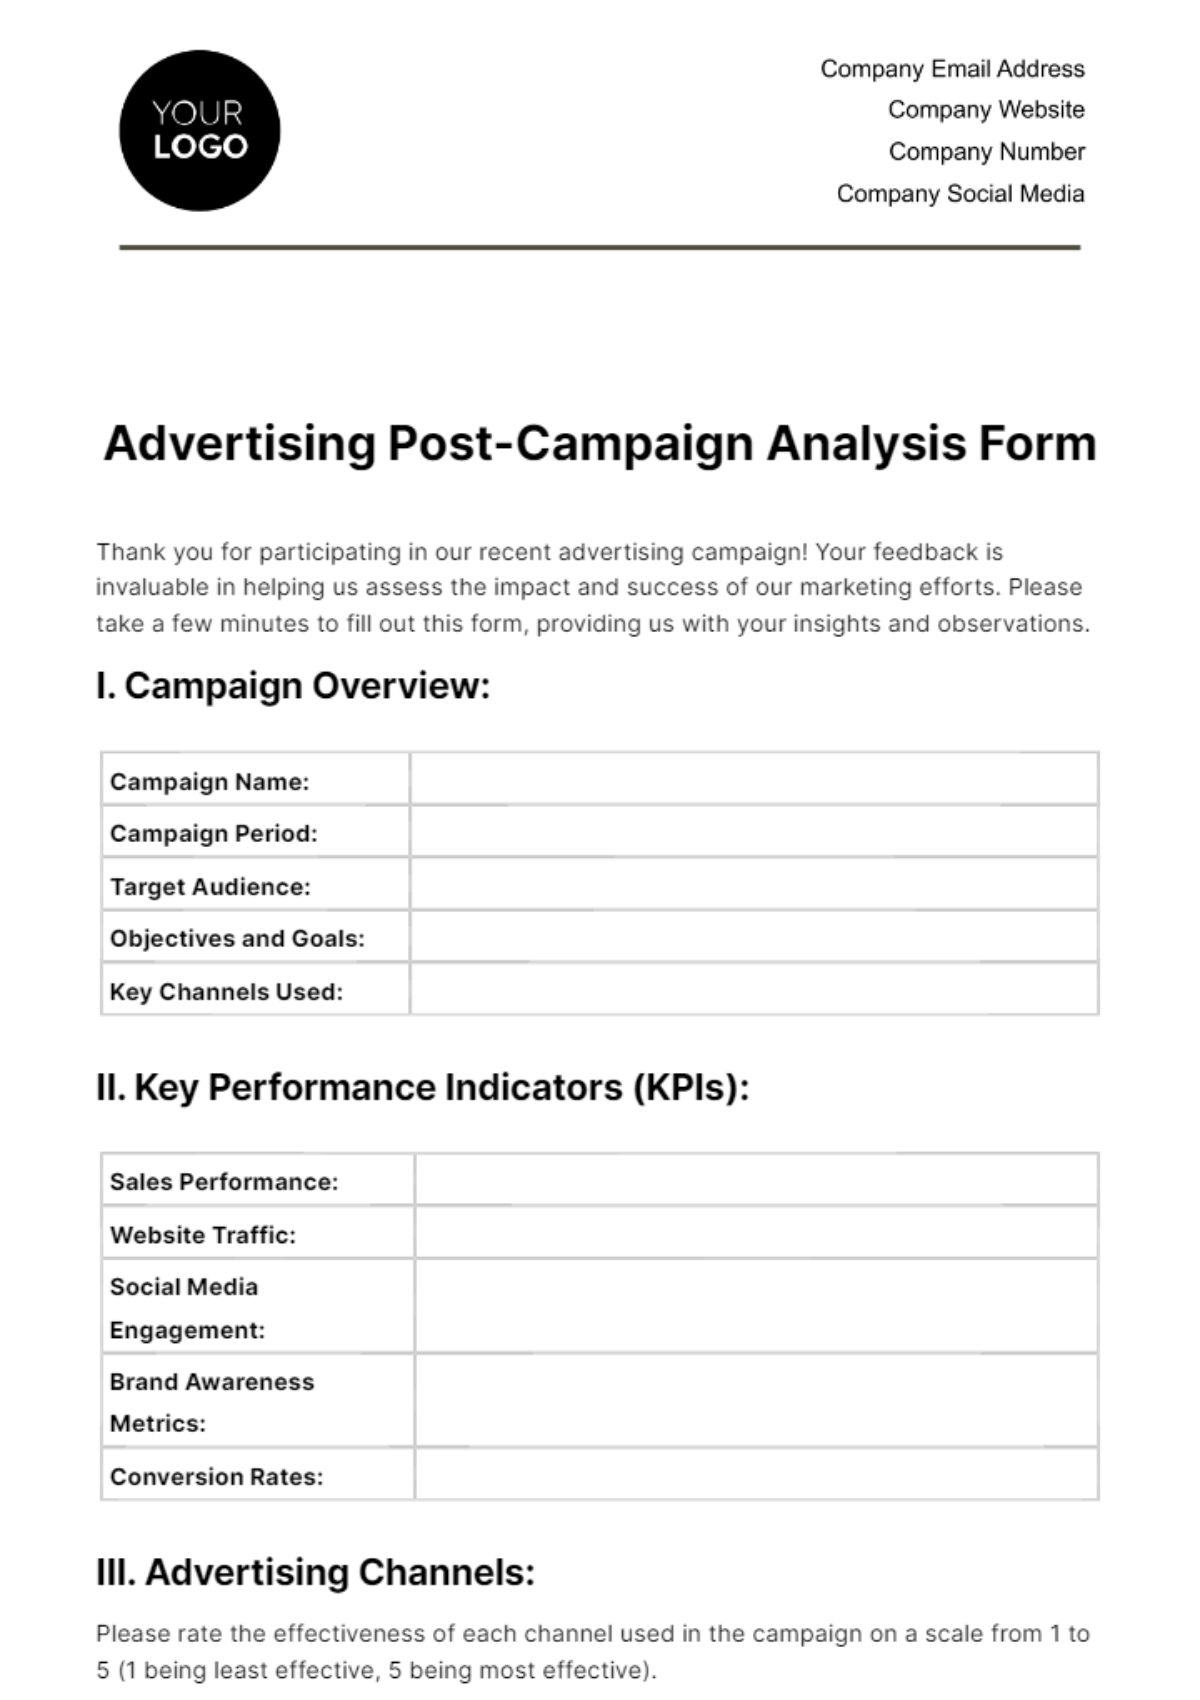 Free Advertising Post-Campaign Analysis Form Template